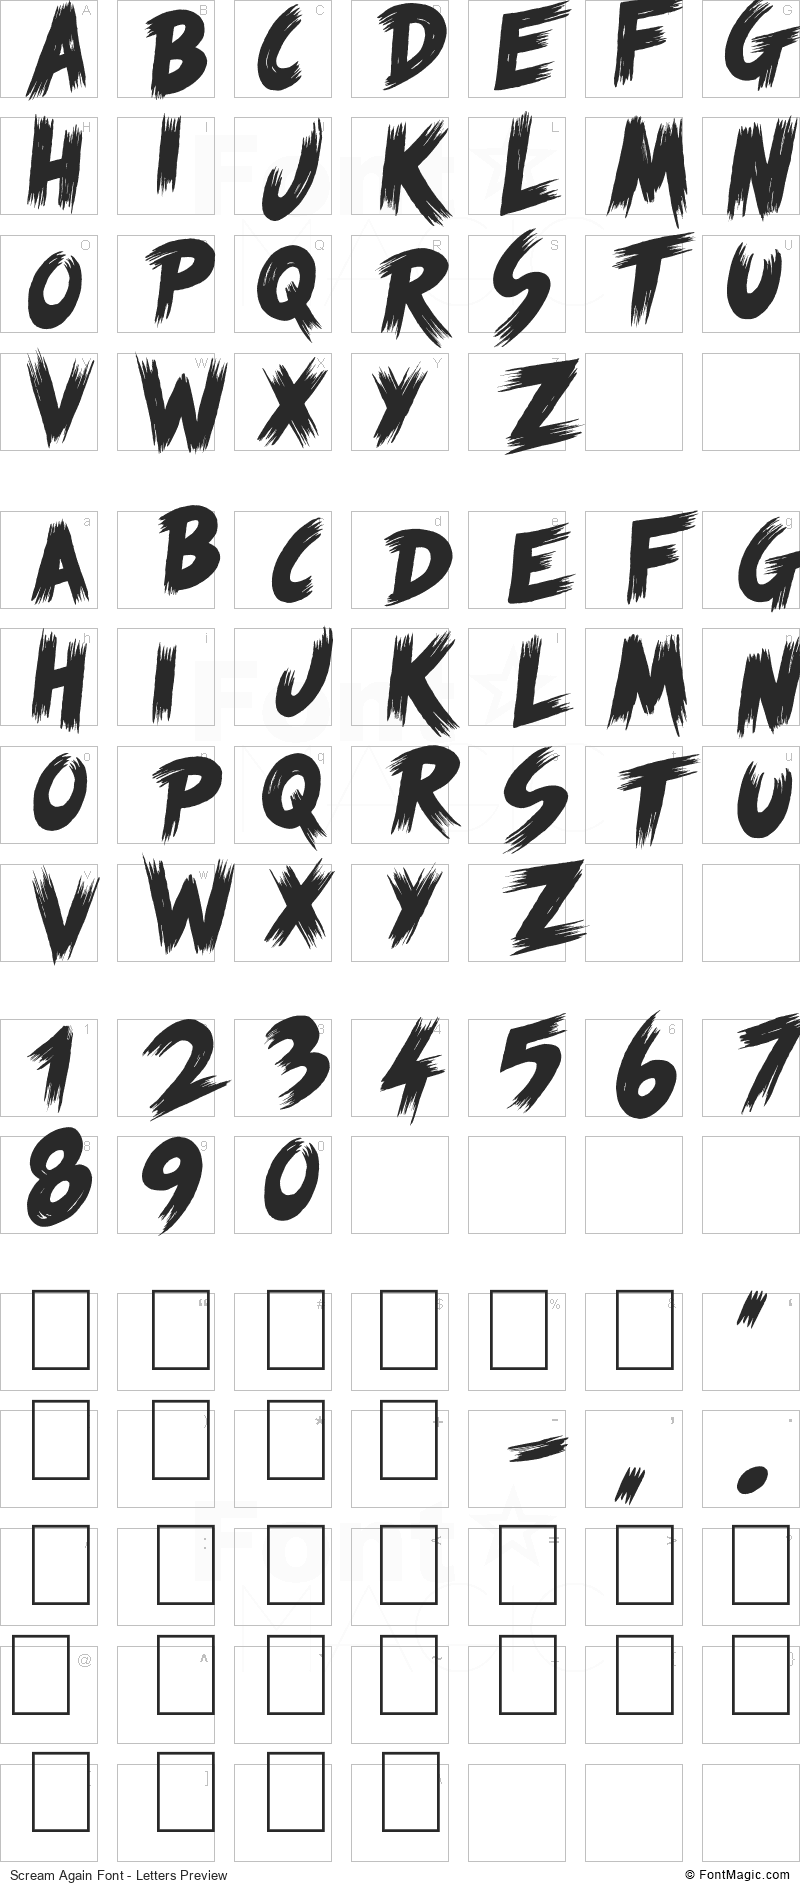 Scream Again Font - All Latters Preview Chart